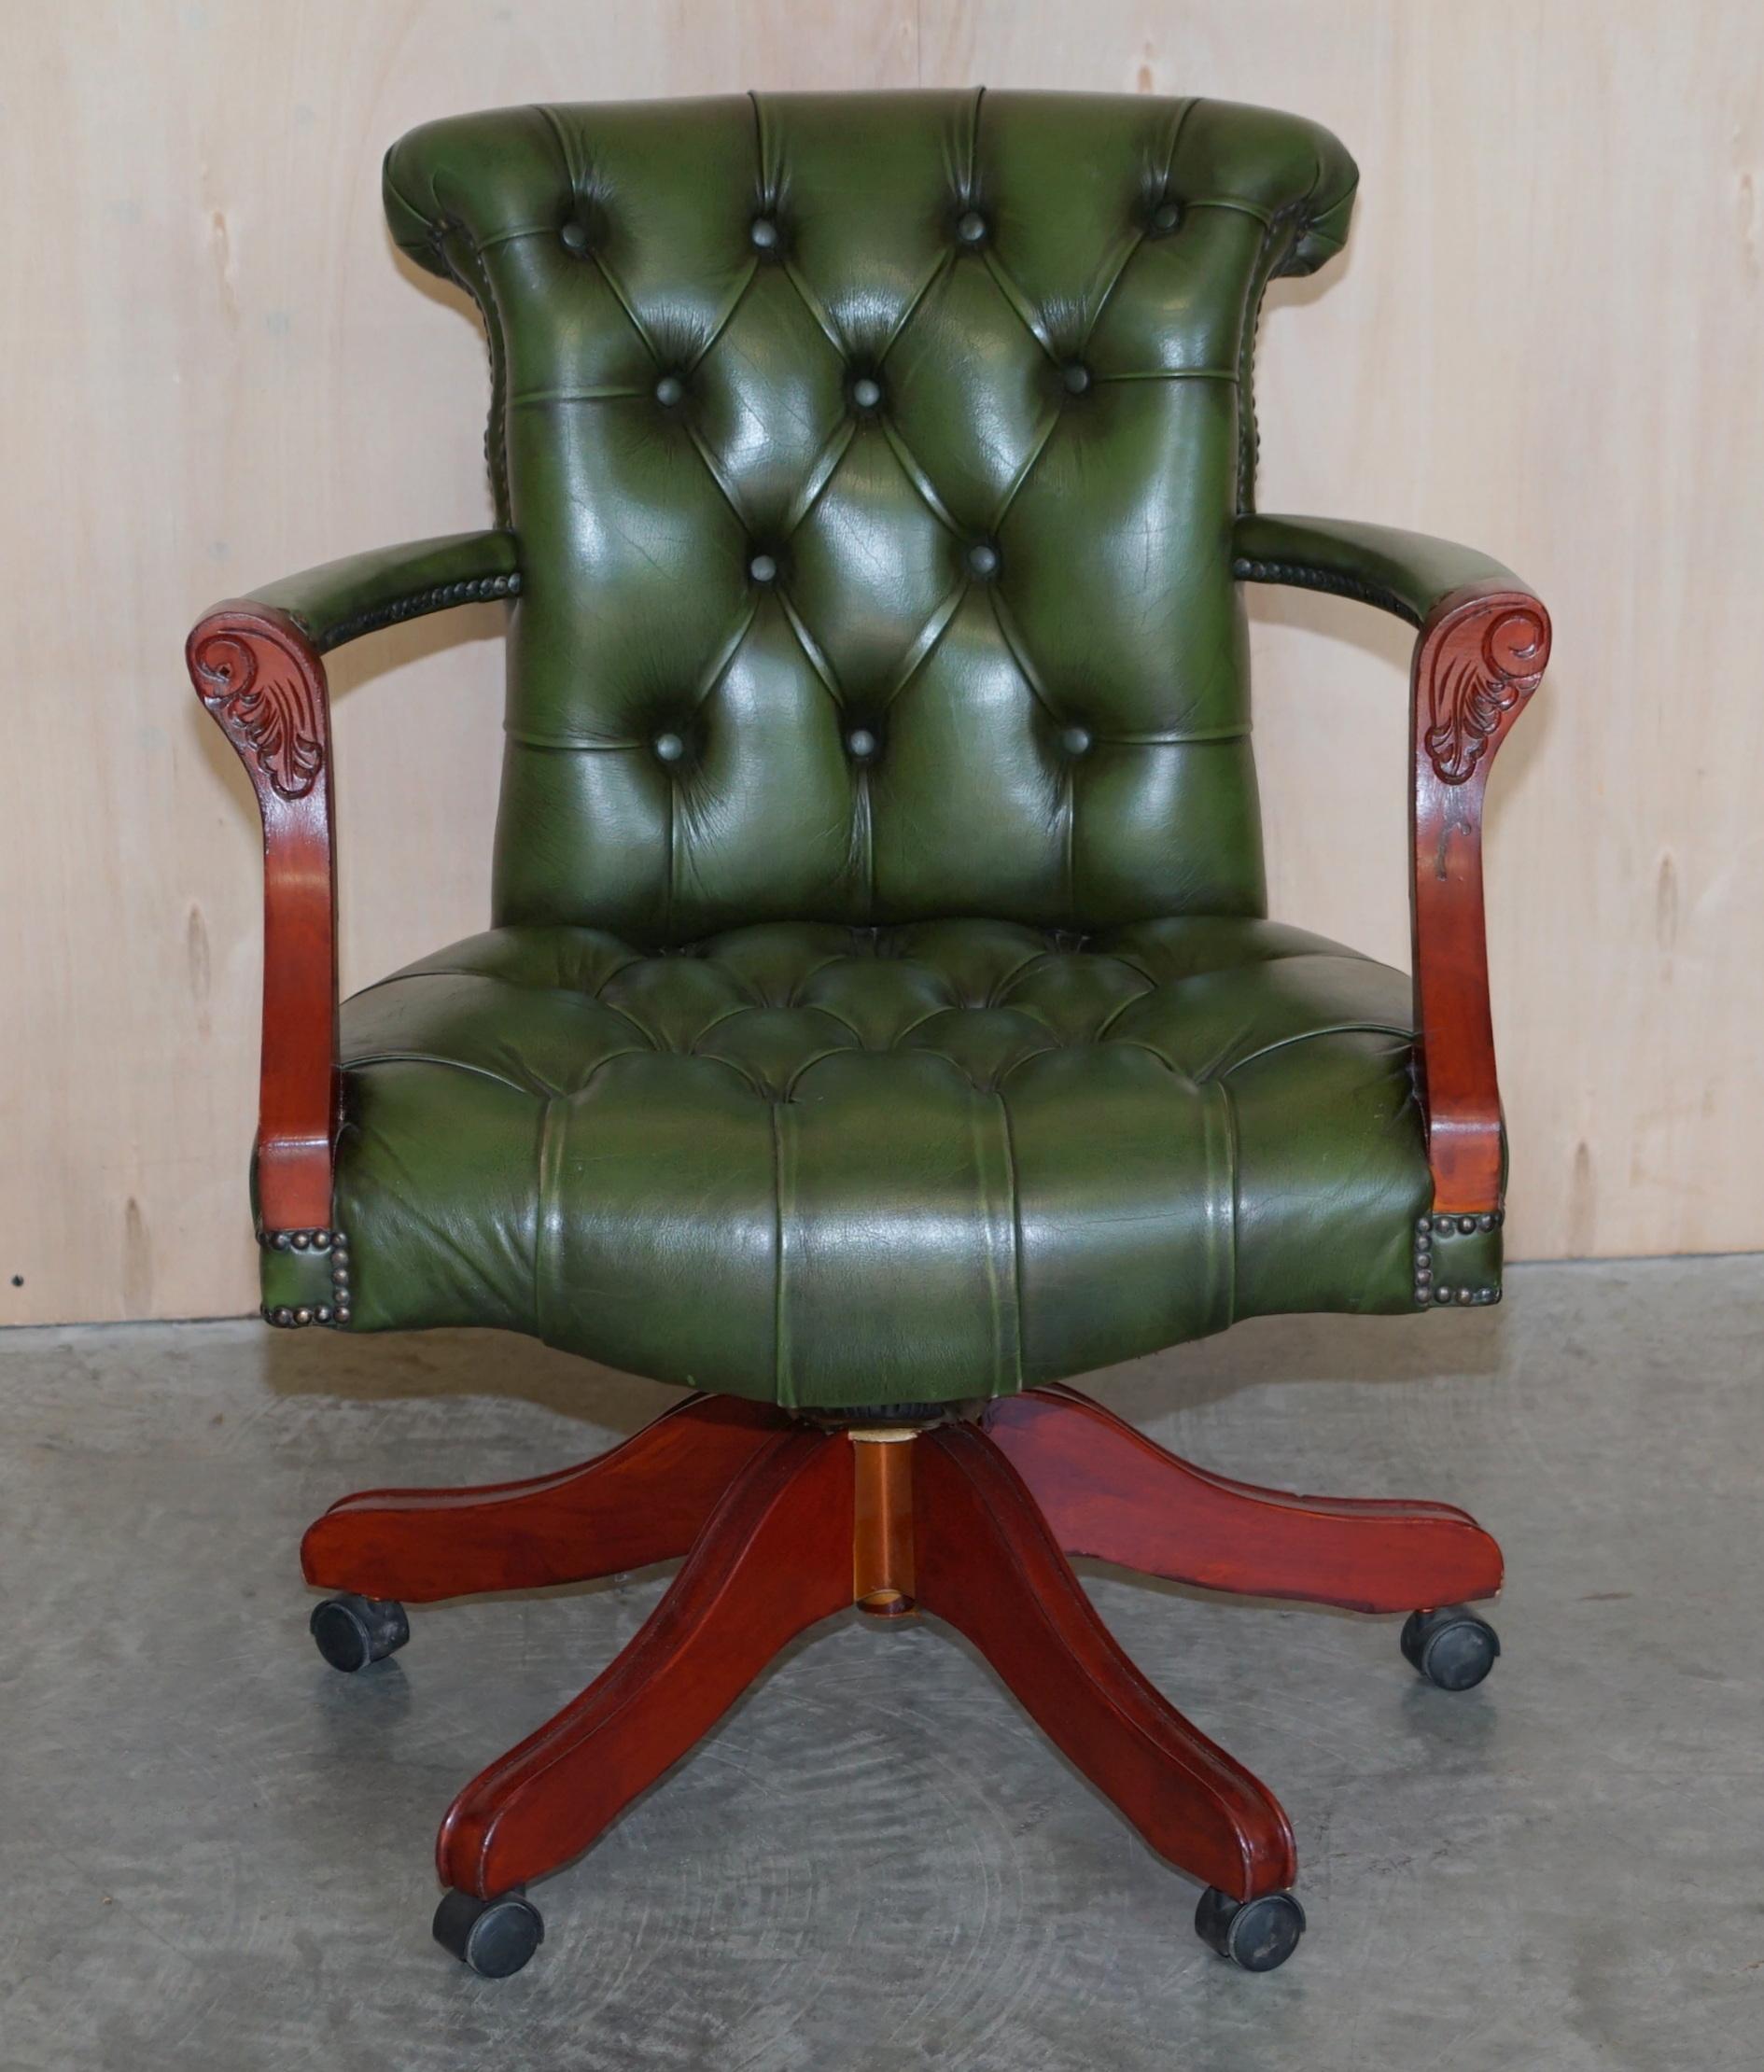 We are delighted to offer for sale this lovely handmade Chesterfield buttoned green leather Captains or Directors armchair.

A good looking well-made and decorative captain’s chair, it has a light beech wood frame with a mahogany finish and green